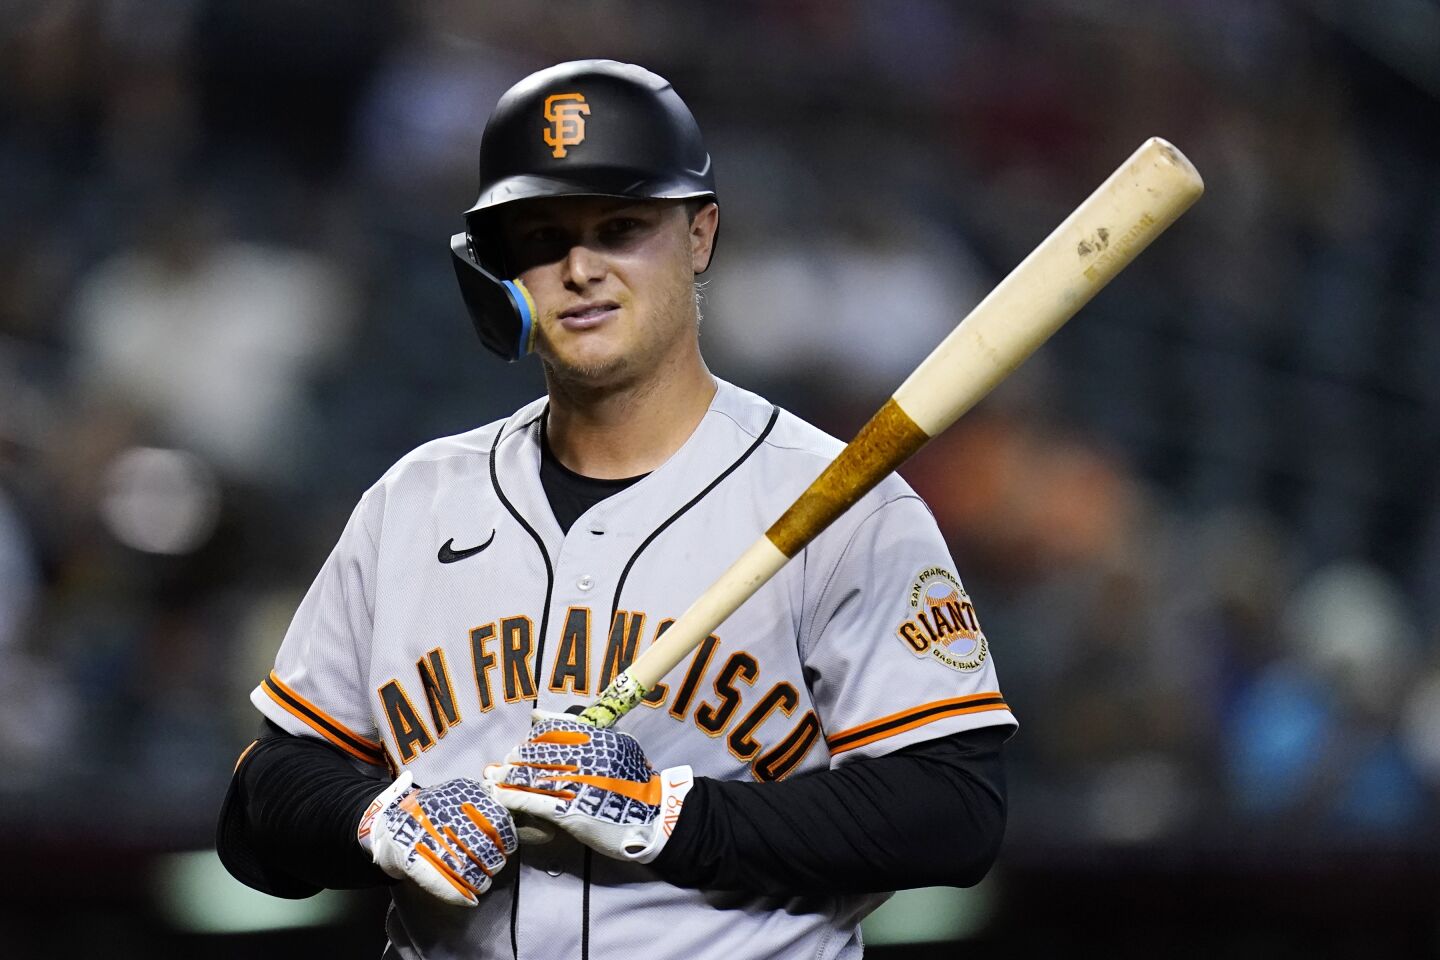 Trending: San FranciscoOF Joc Pederson (pictured) leads the team with 17 homers, followed by 2B Wilmer Flores with 16 homers. With a .816 OPS, Pederson is the lone regular with an OPS over .800. Flores and C Joey Bart both have three homers since the All-Star Break, but no regular has an OPS above .765 this half. The Giants slumping since the All-Star break include Pederson (.477 OPS), OF Mike Yastrzemski (.522 OPS) and 1B Brandon Belt (.585 OPS). In the bullpen, RHP Camilo Doval (3.00 ERA) leads the team with 14 saves in 16 chances. He has two saves since the break (3.38 ERA) and RHP Dominic Leone has one despite allowing a 9.53 ERA over his last eight appearances. RHP John Brebbia has a 2.35 ERA since the All-Star break.